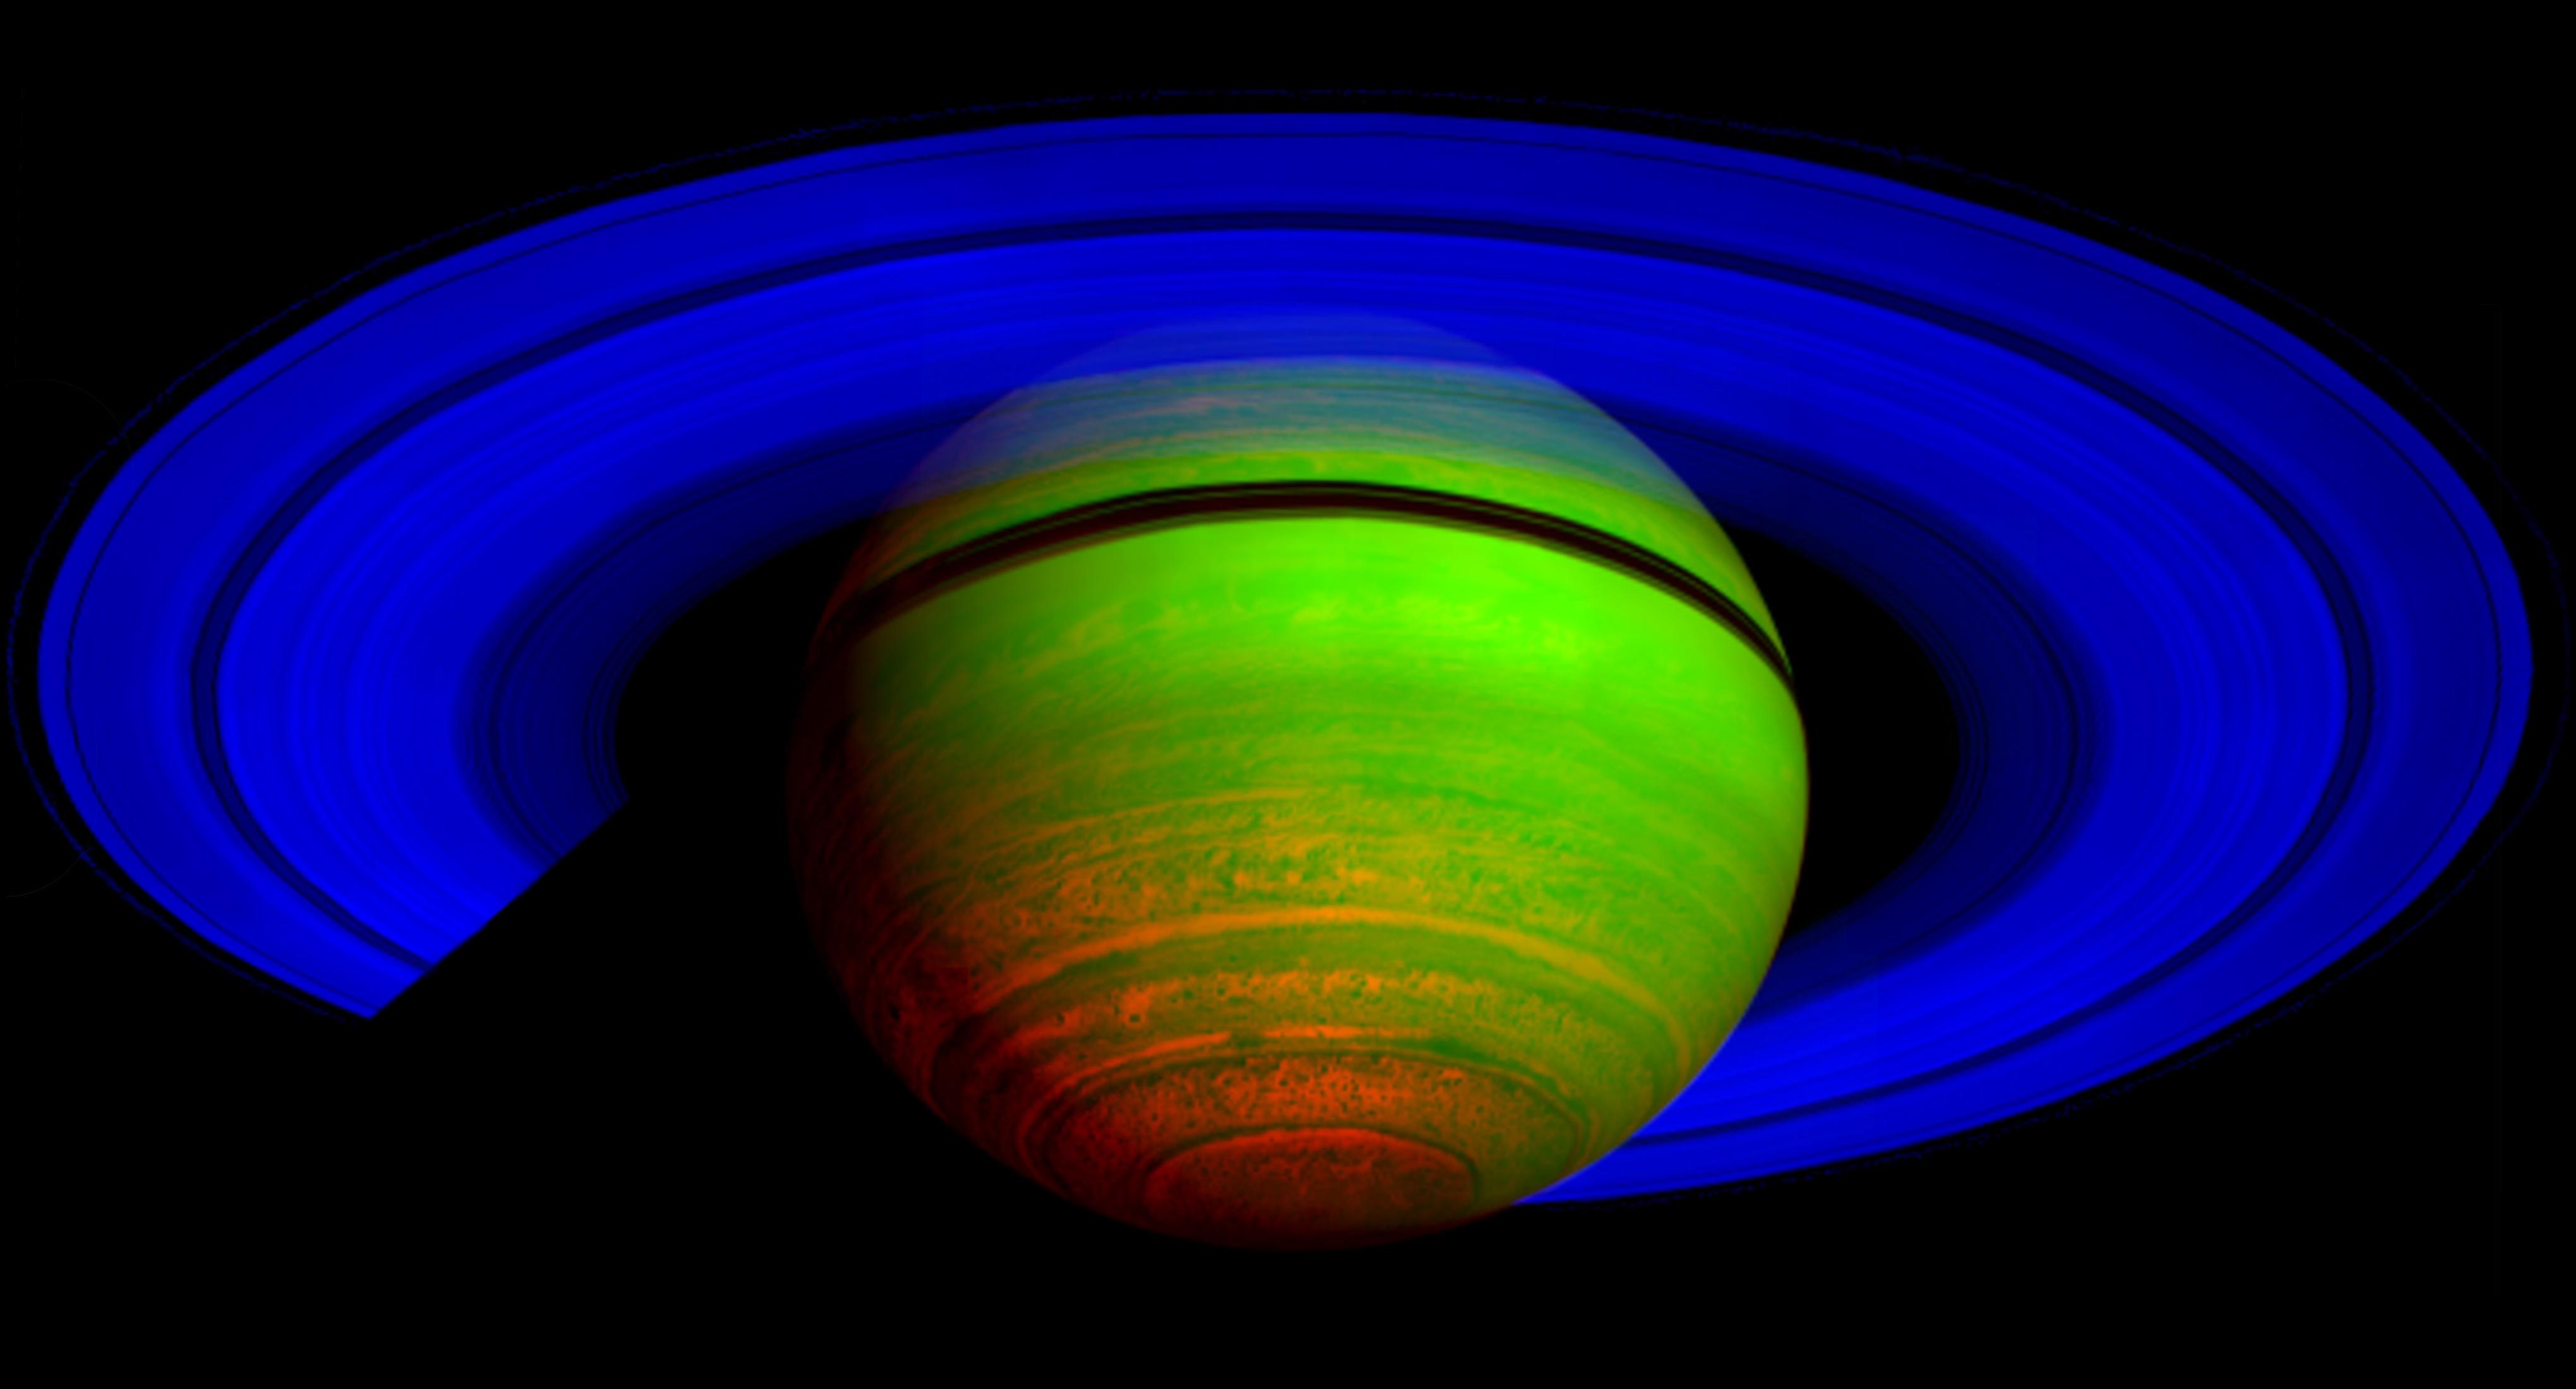 This false-color composite image, constructed from data obtained by NASA's Cassini spacecraft, shows Saturn's rings and southern hemisphere.